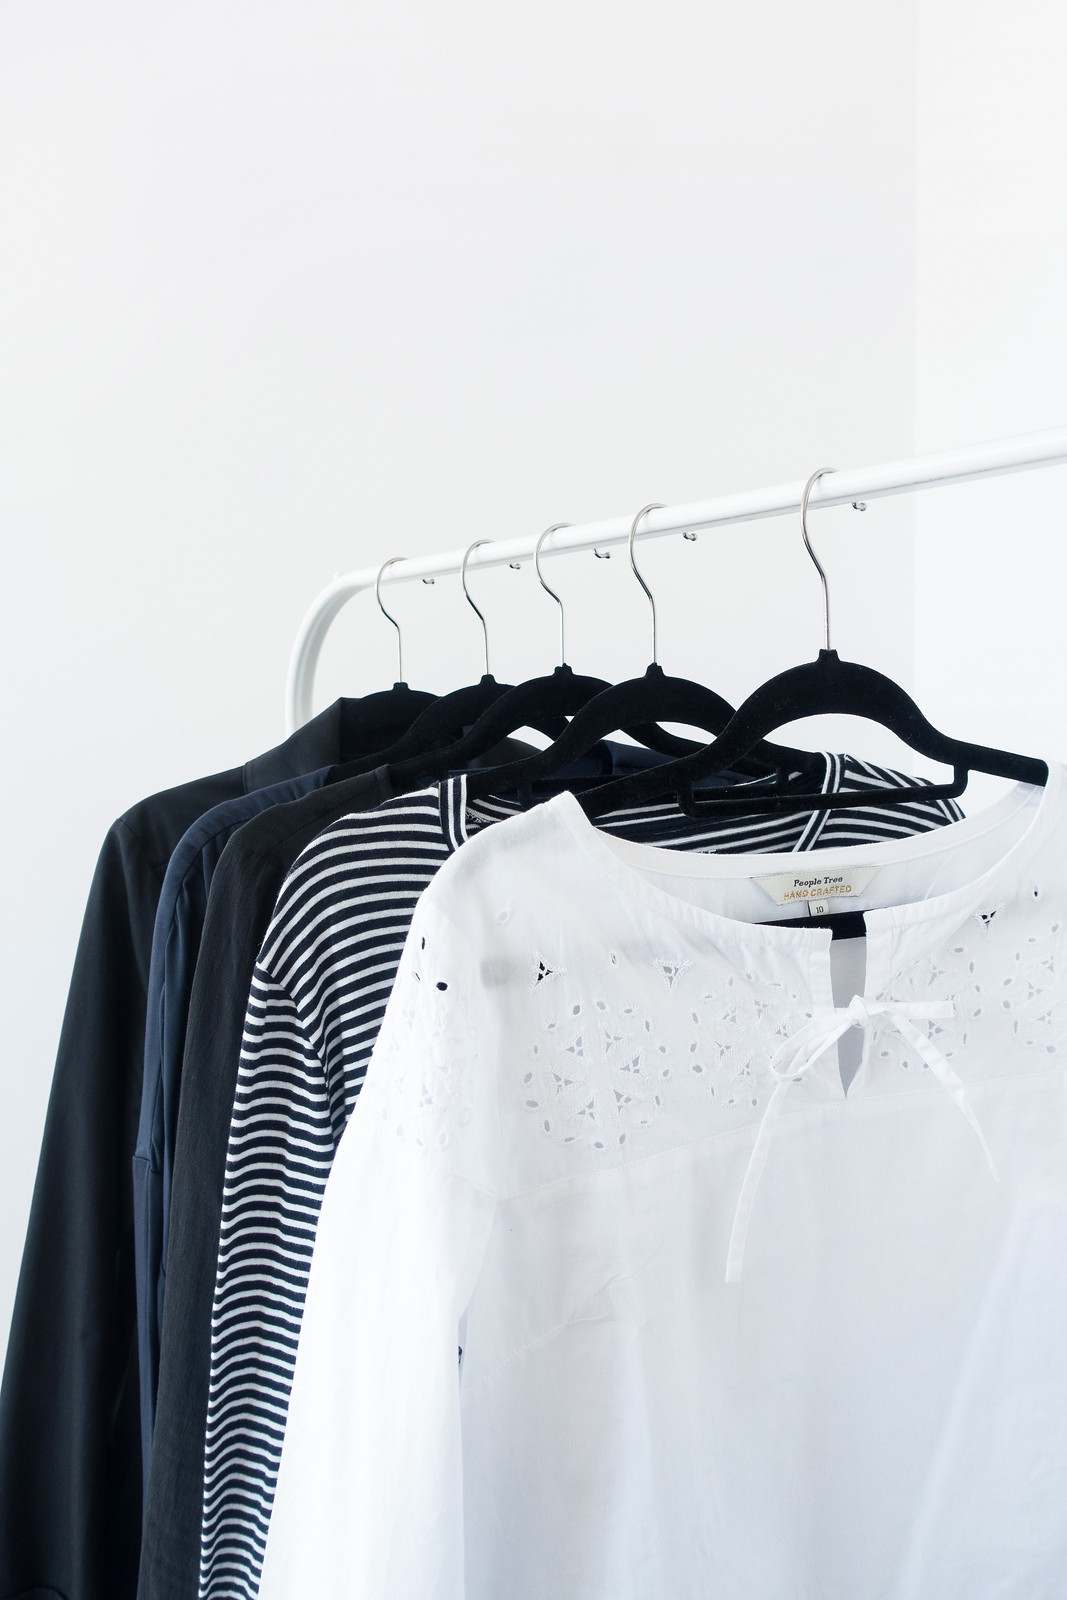 Creating A Go-To List Of Brands For Your Wardrobe